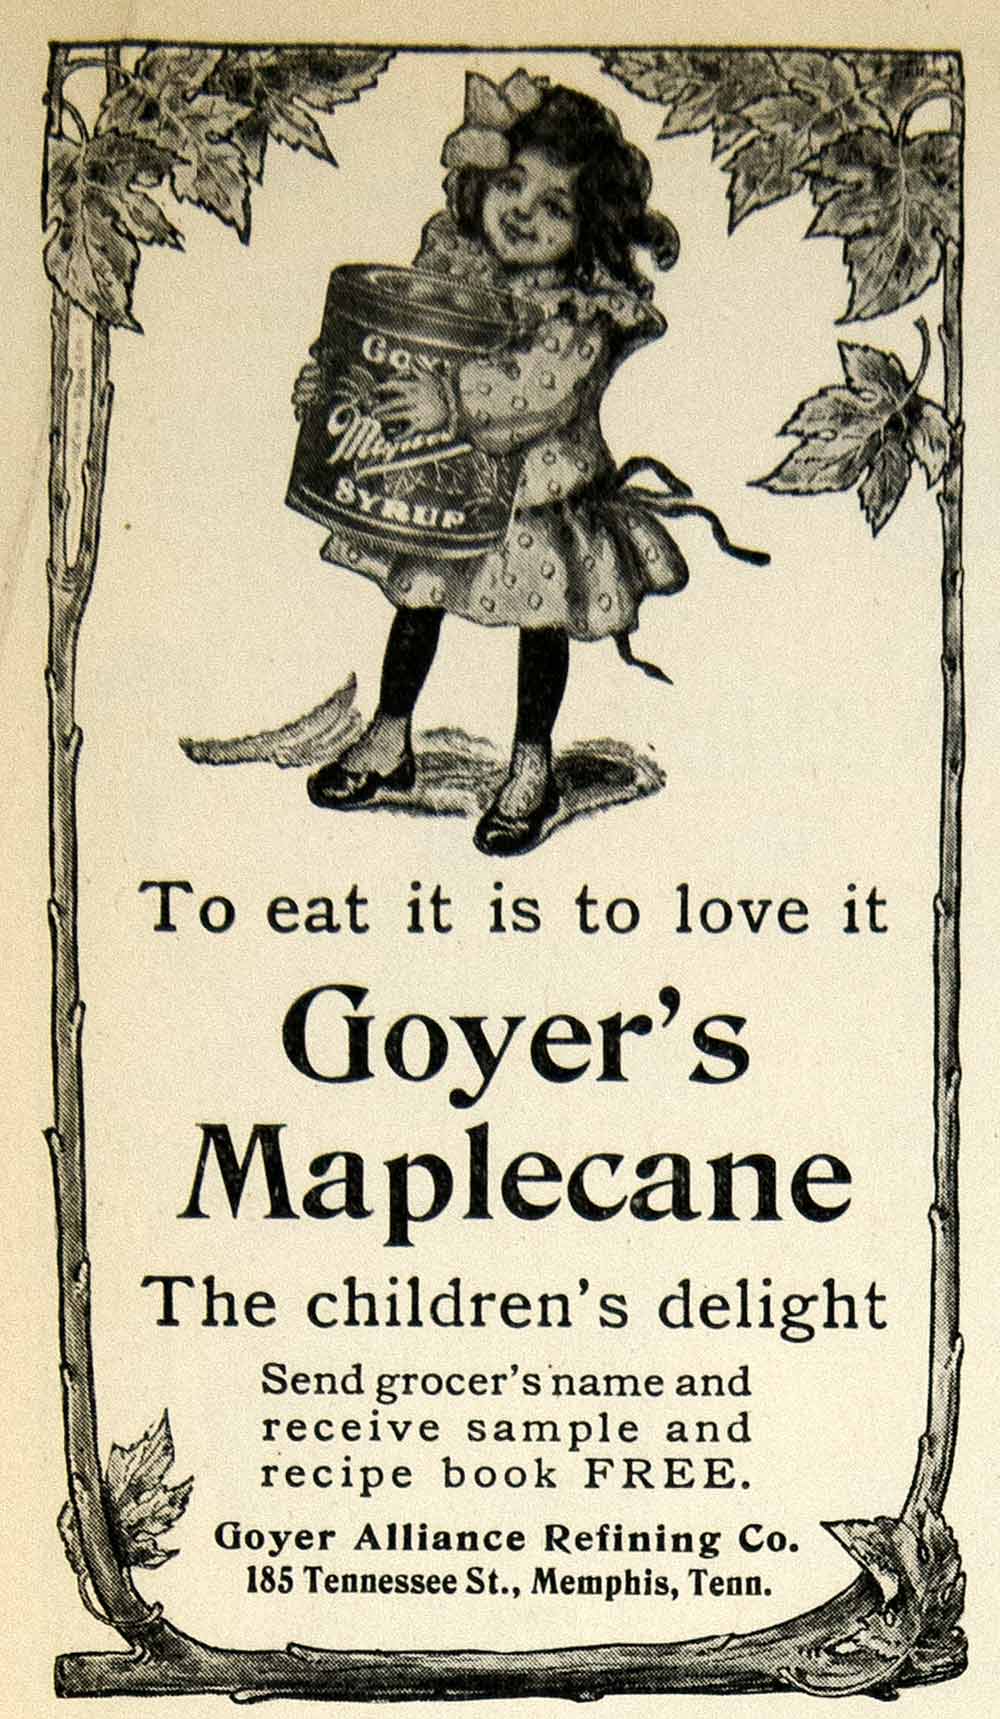 1905 Ad Goyer Alliance Refining 185 Tennessee St Memphis TN Maplecane Syrup YDL2